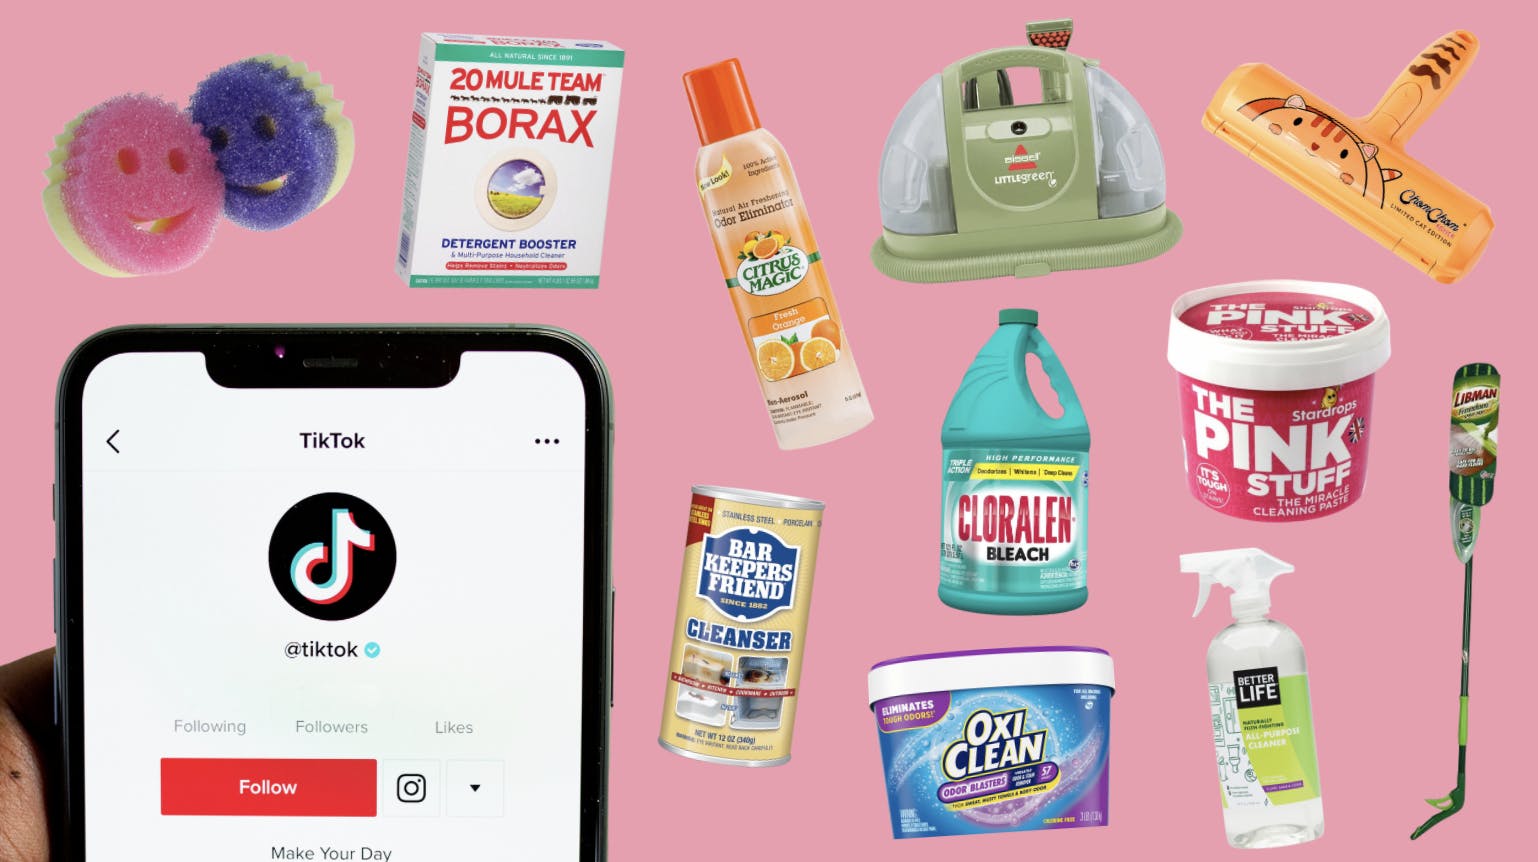 TikTok's viral 'The Pink Stuff' cleaning paste is on sale